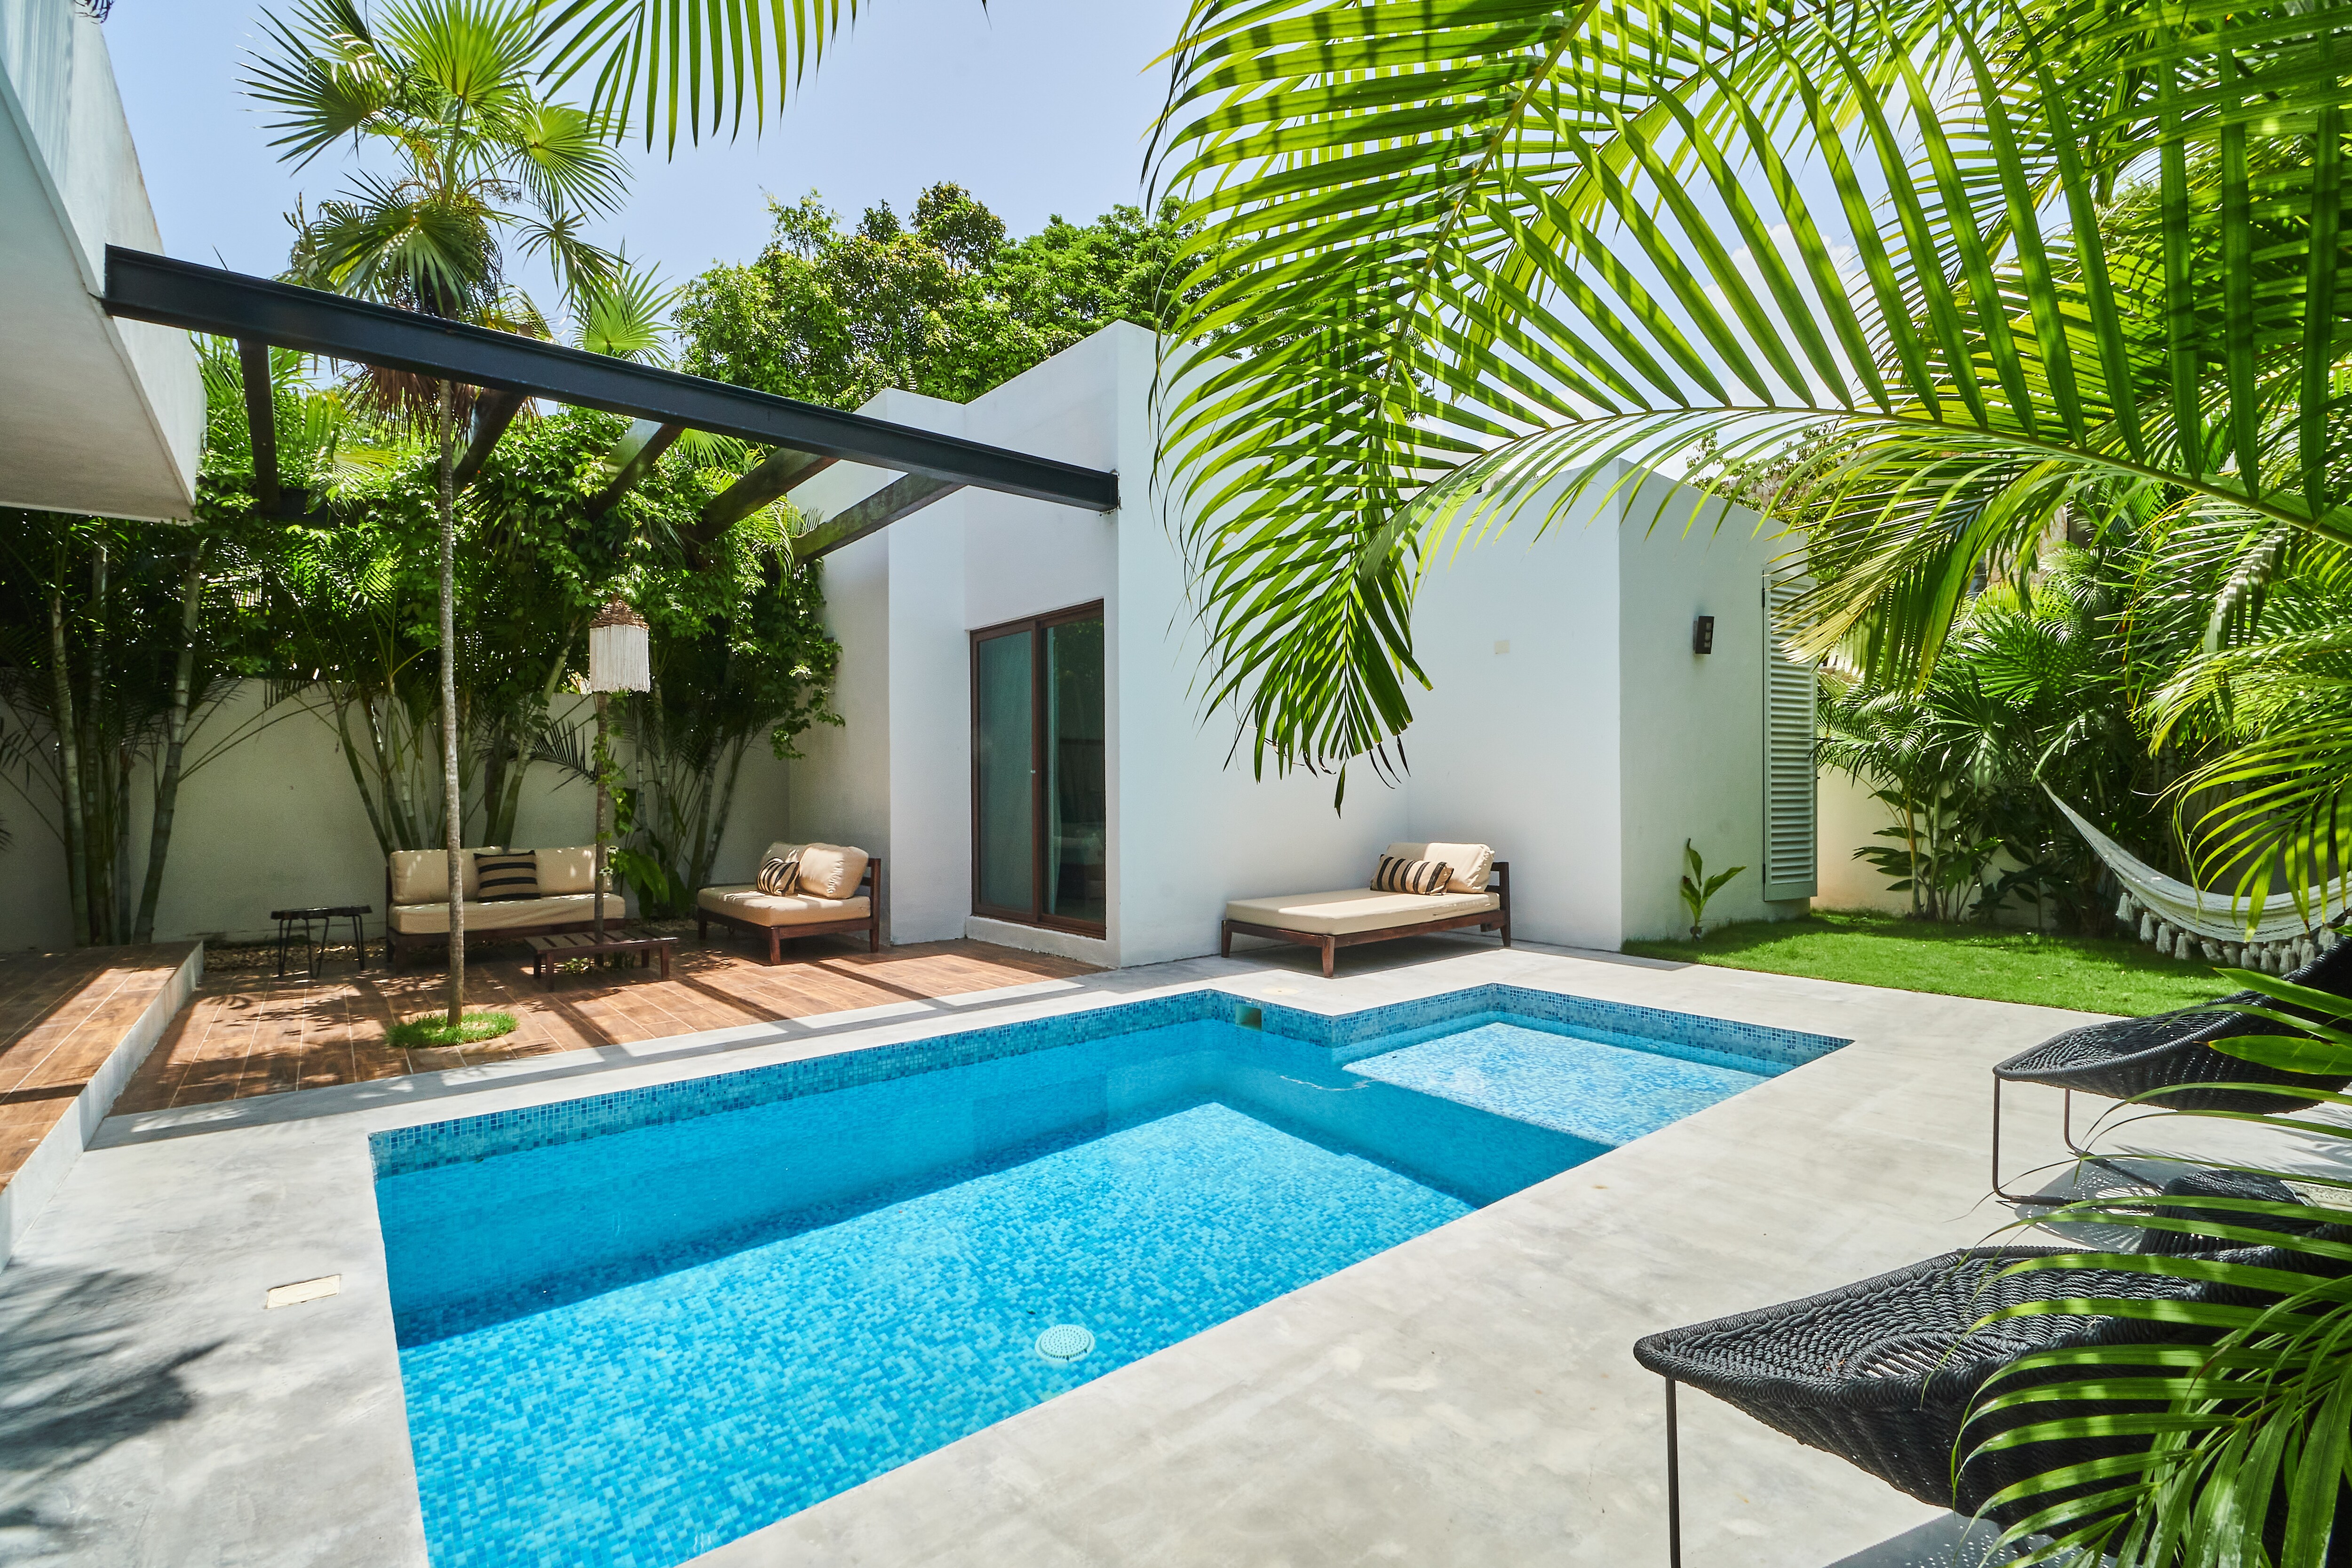 Property Image 2 - Casa Mallorca | Tropical Vibes | Private Pool, Backyard With Grill, Sunroof & Hammock | Concierge